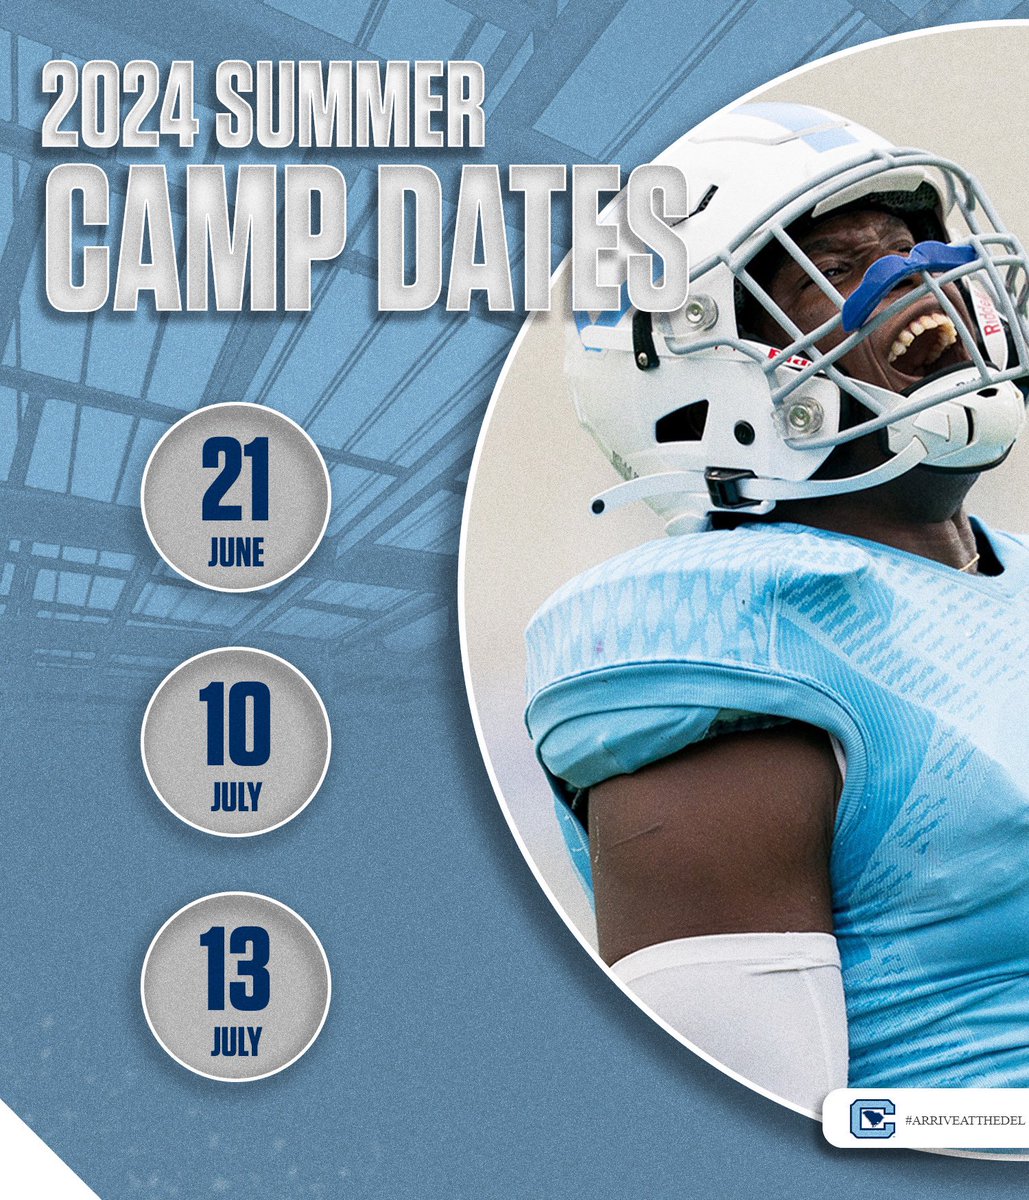 WHERE MY COMPETITORS AT⁉️ COME COMPETE‼️ COME SHOW OFF ‼️ #firethoseCANNONS